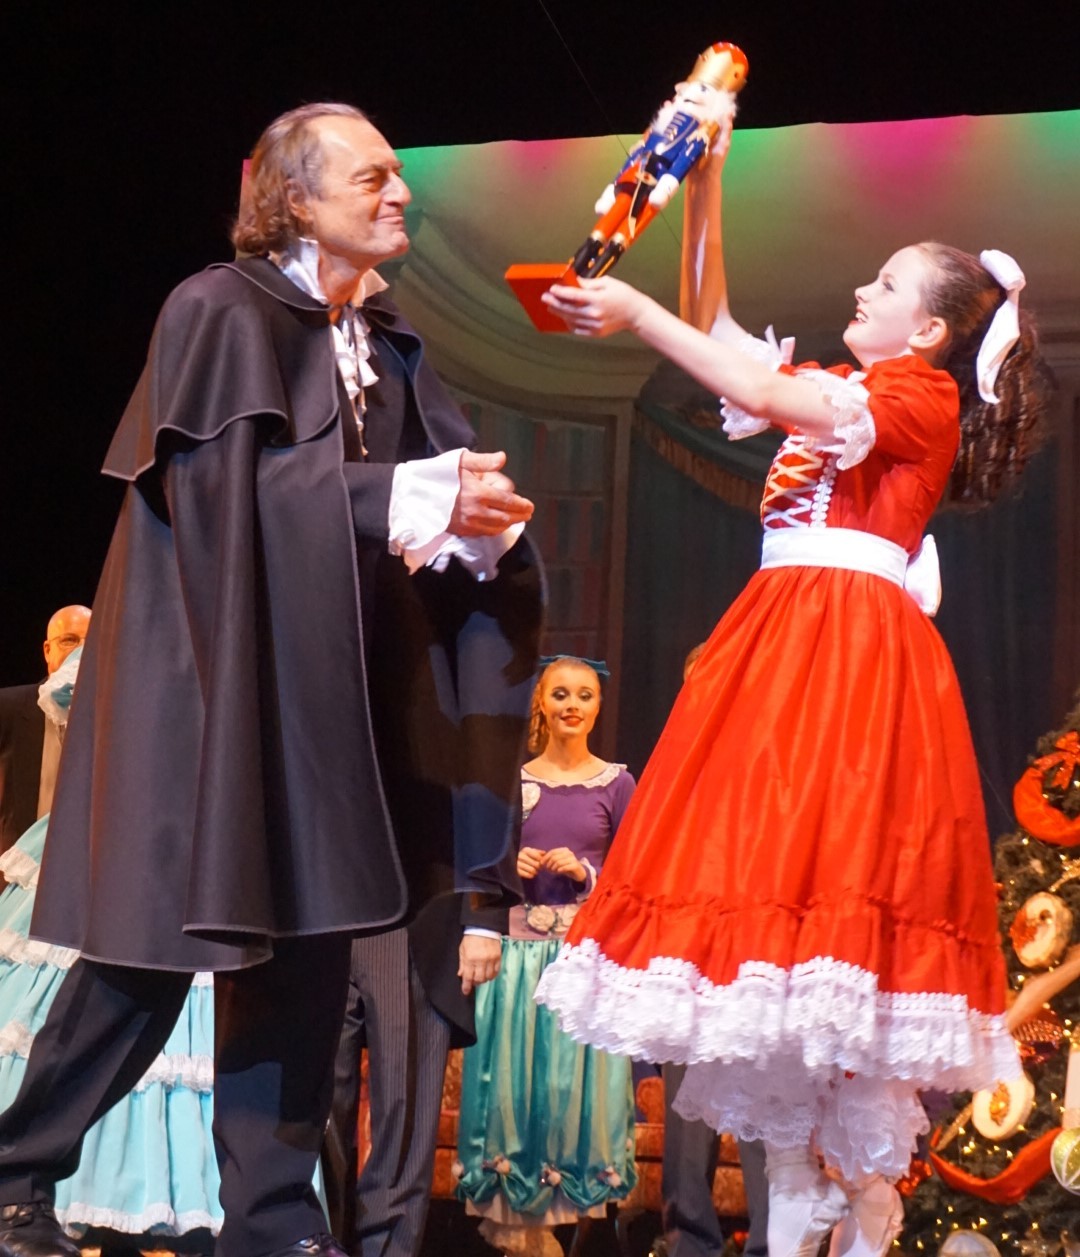 Clara (Marissa Jacobs) admires the Nutcracker given to her by Drosselmeyer (Anthony Egeln, Sr.)